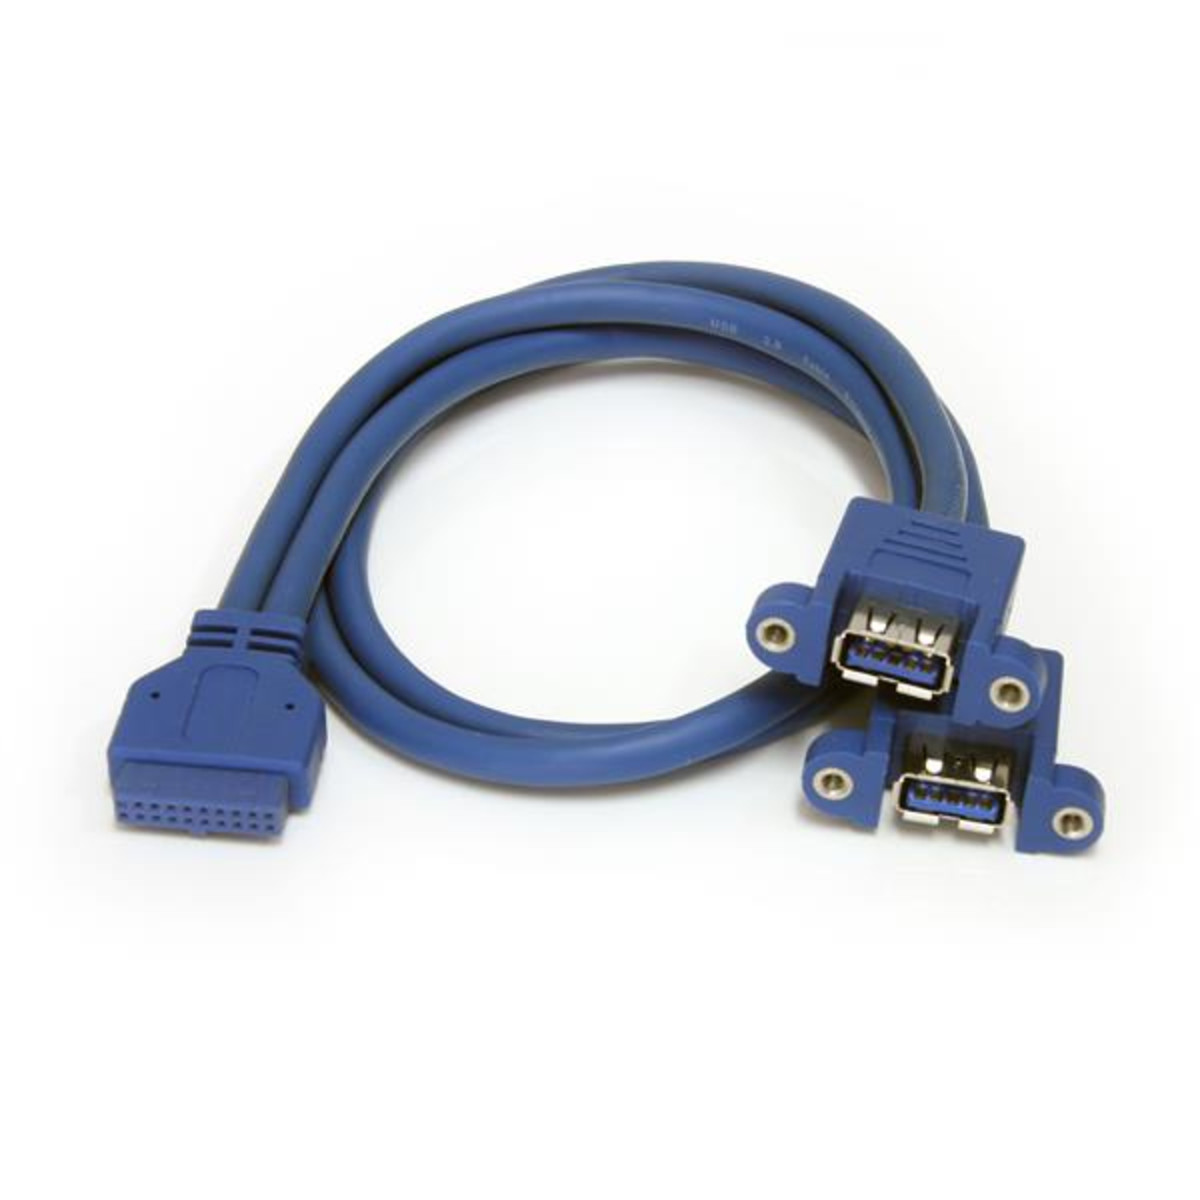 2 Port Panel Mount USB 3.0 Cable